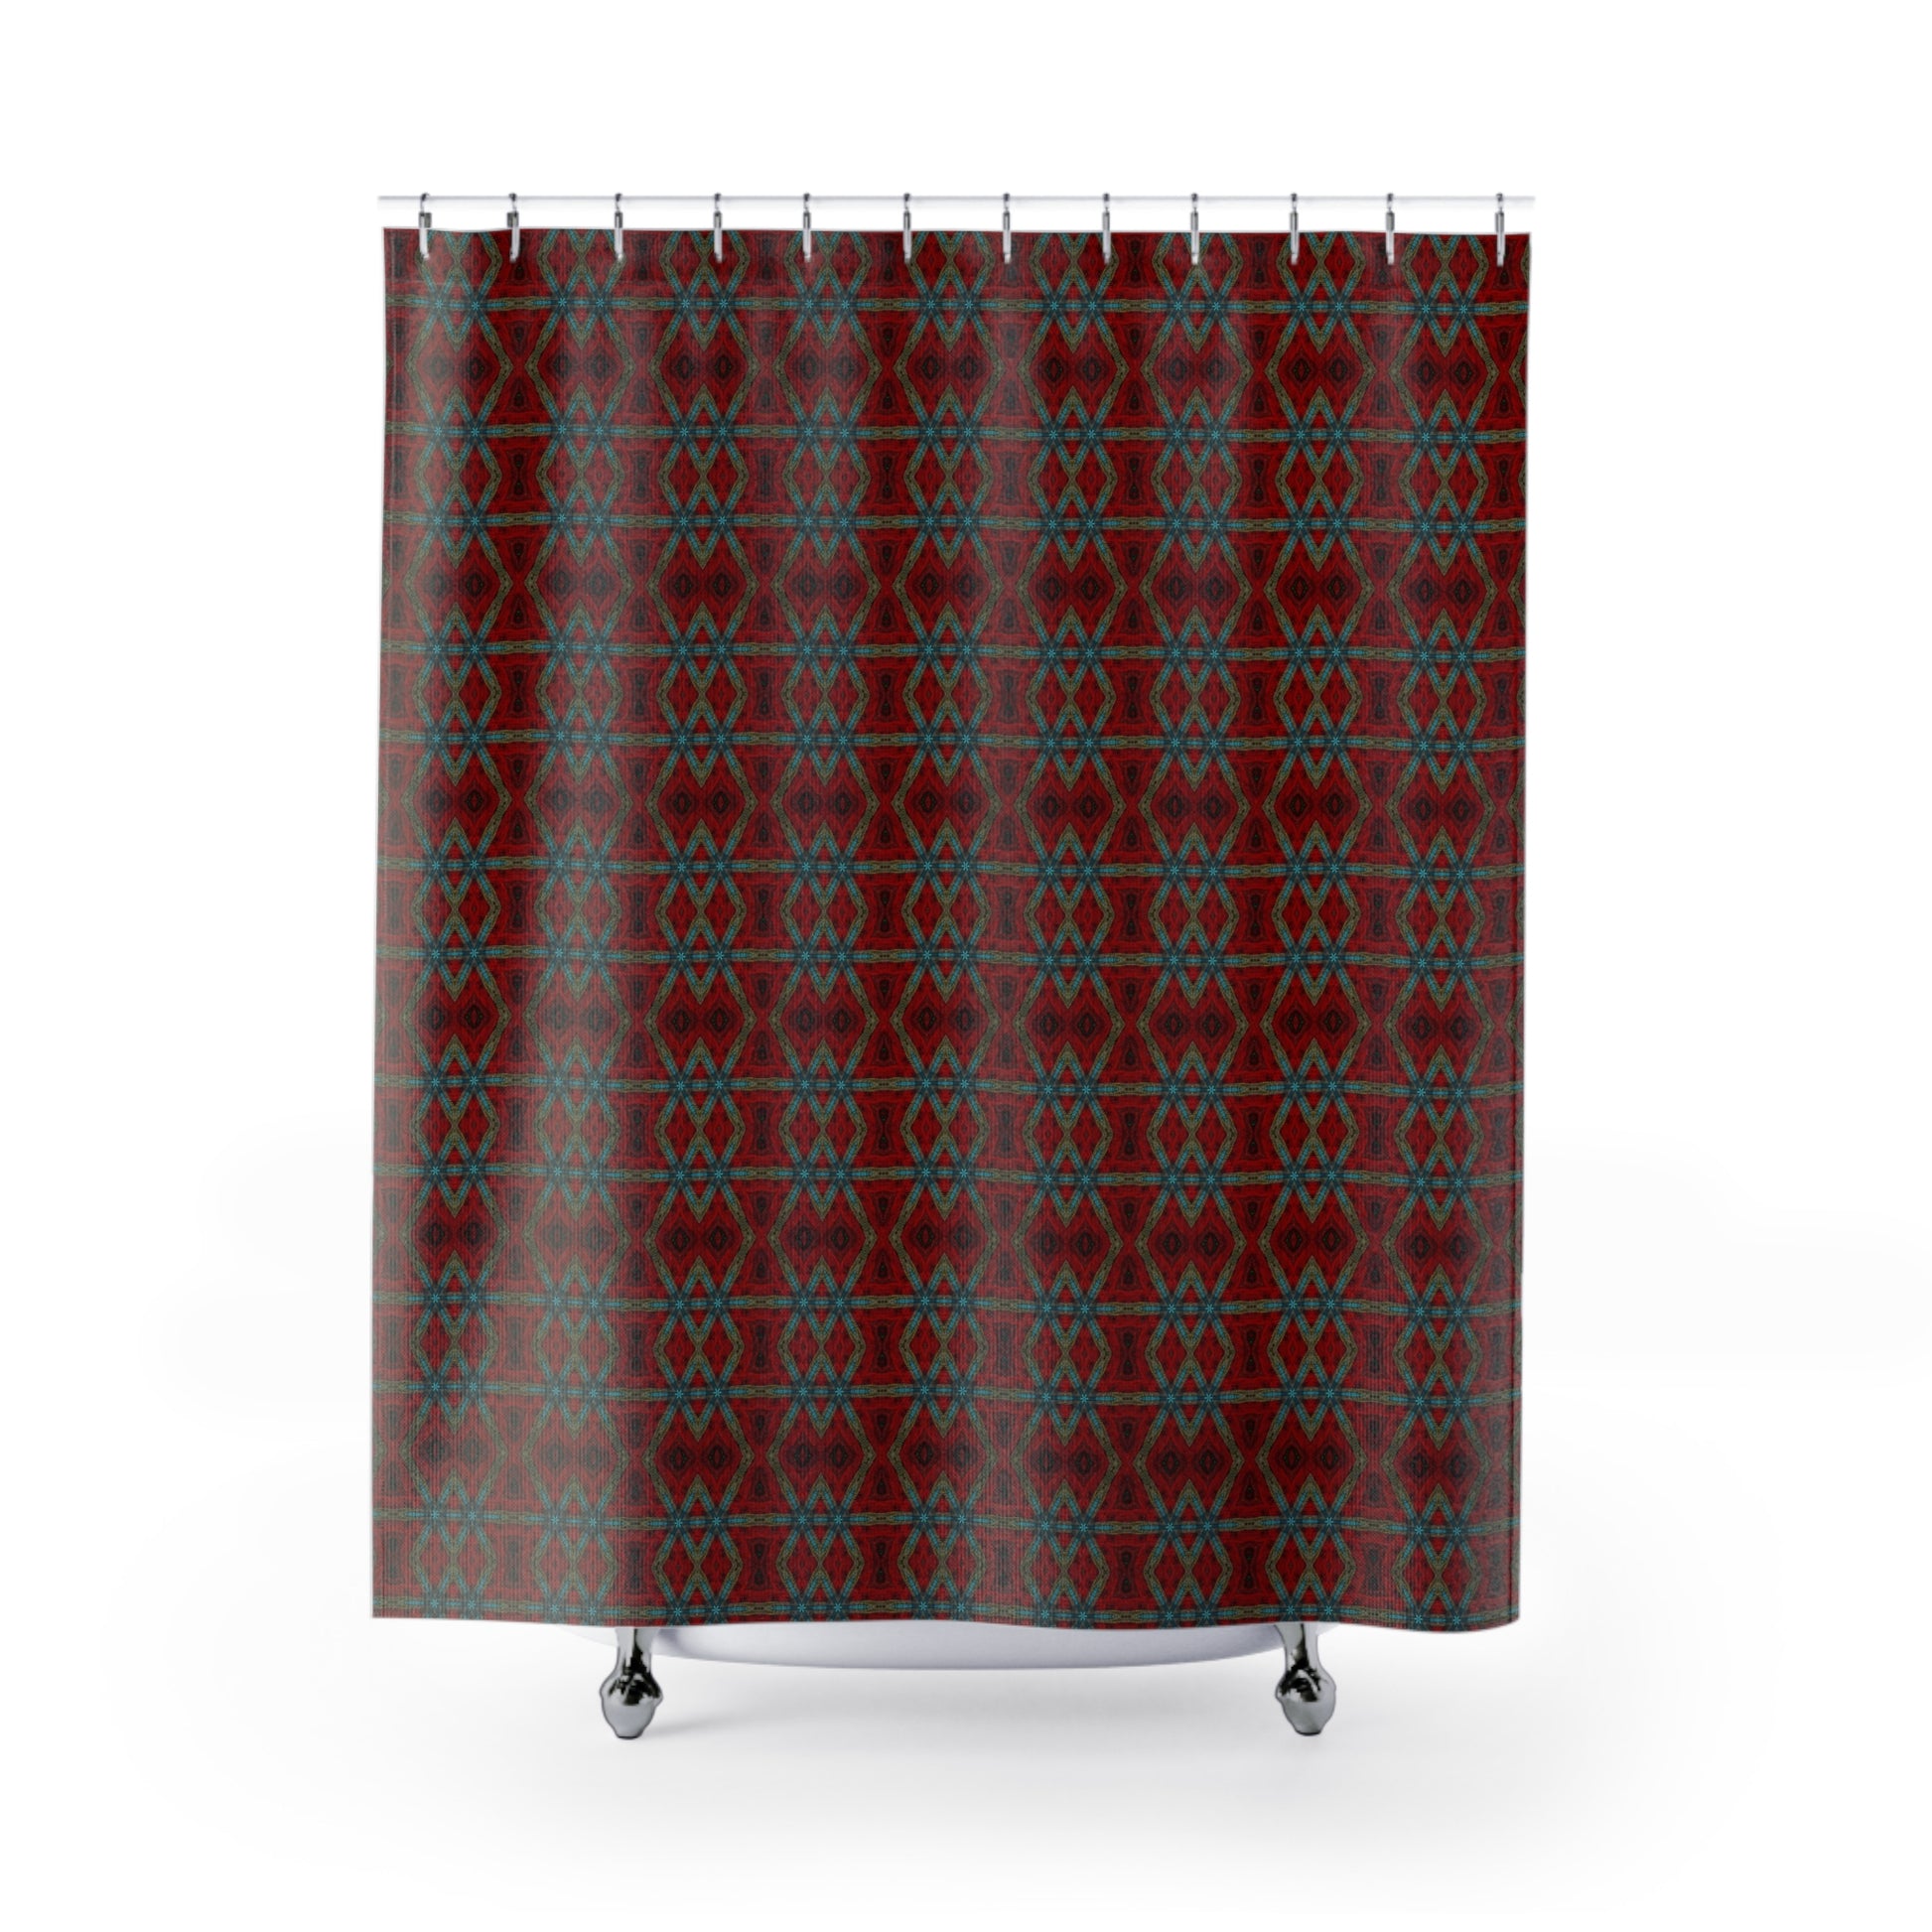 red shower curtain with red abstract design called aztec tartan